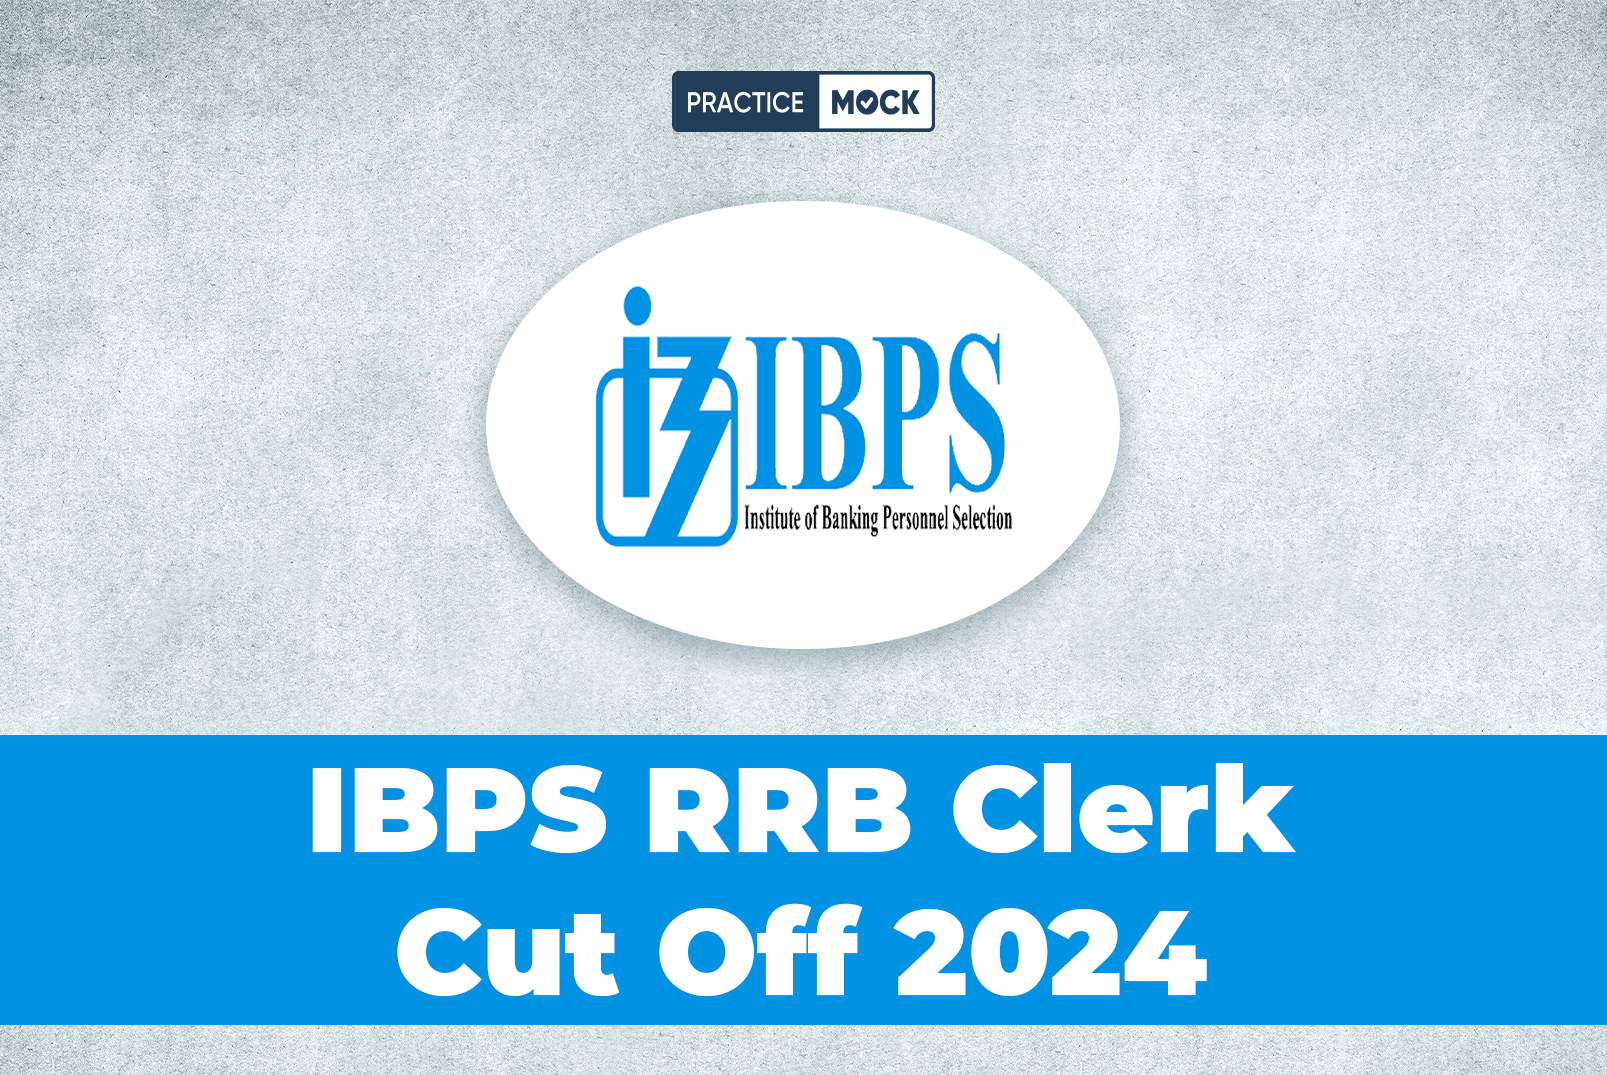 IBPS RRB Clerk Cut Off 2024, Previous Year Cut Off